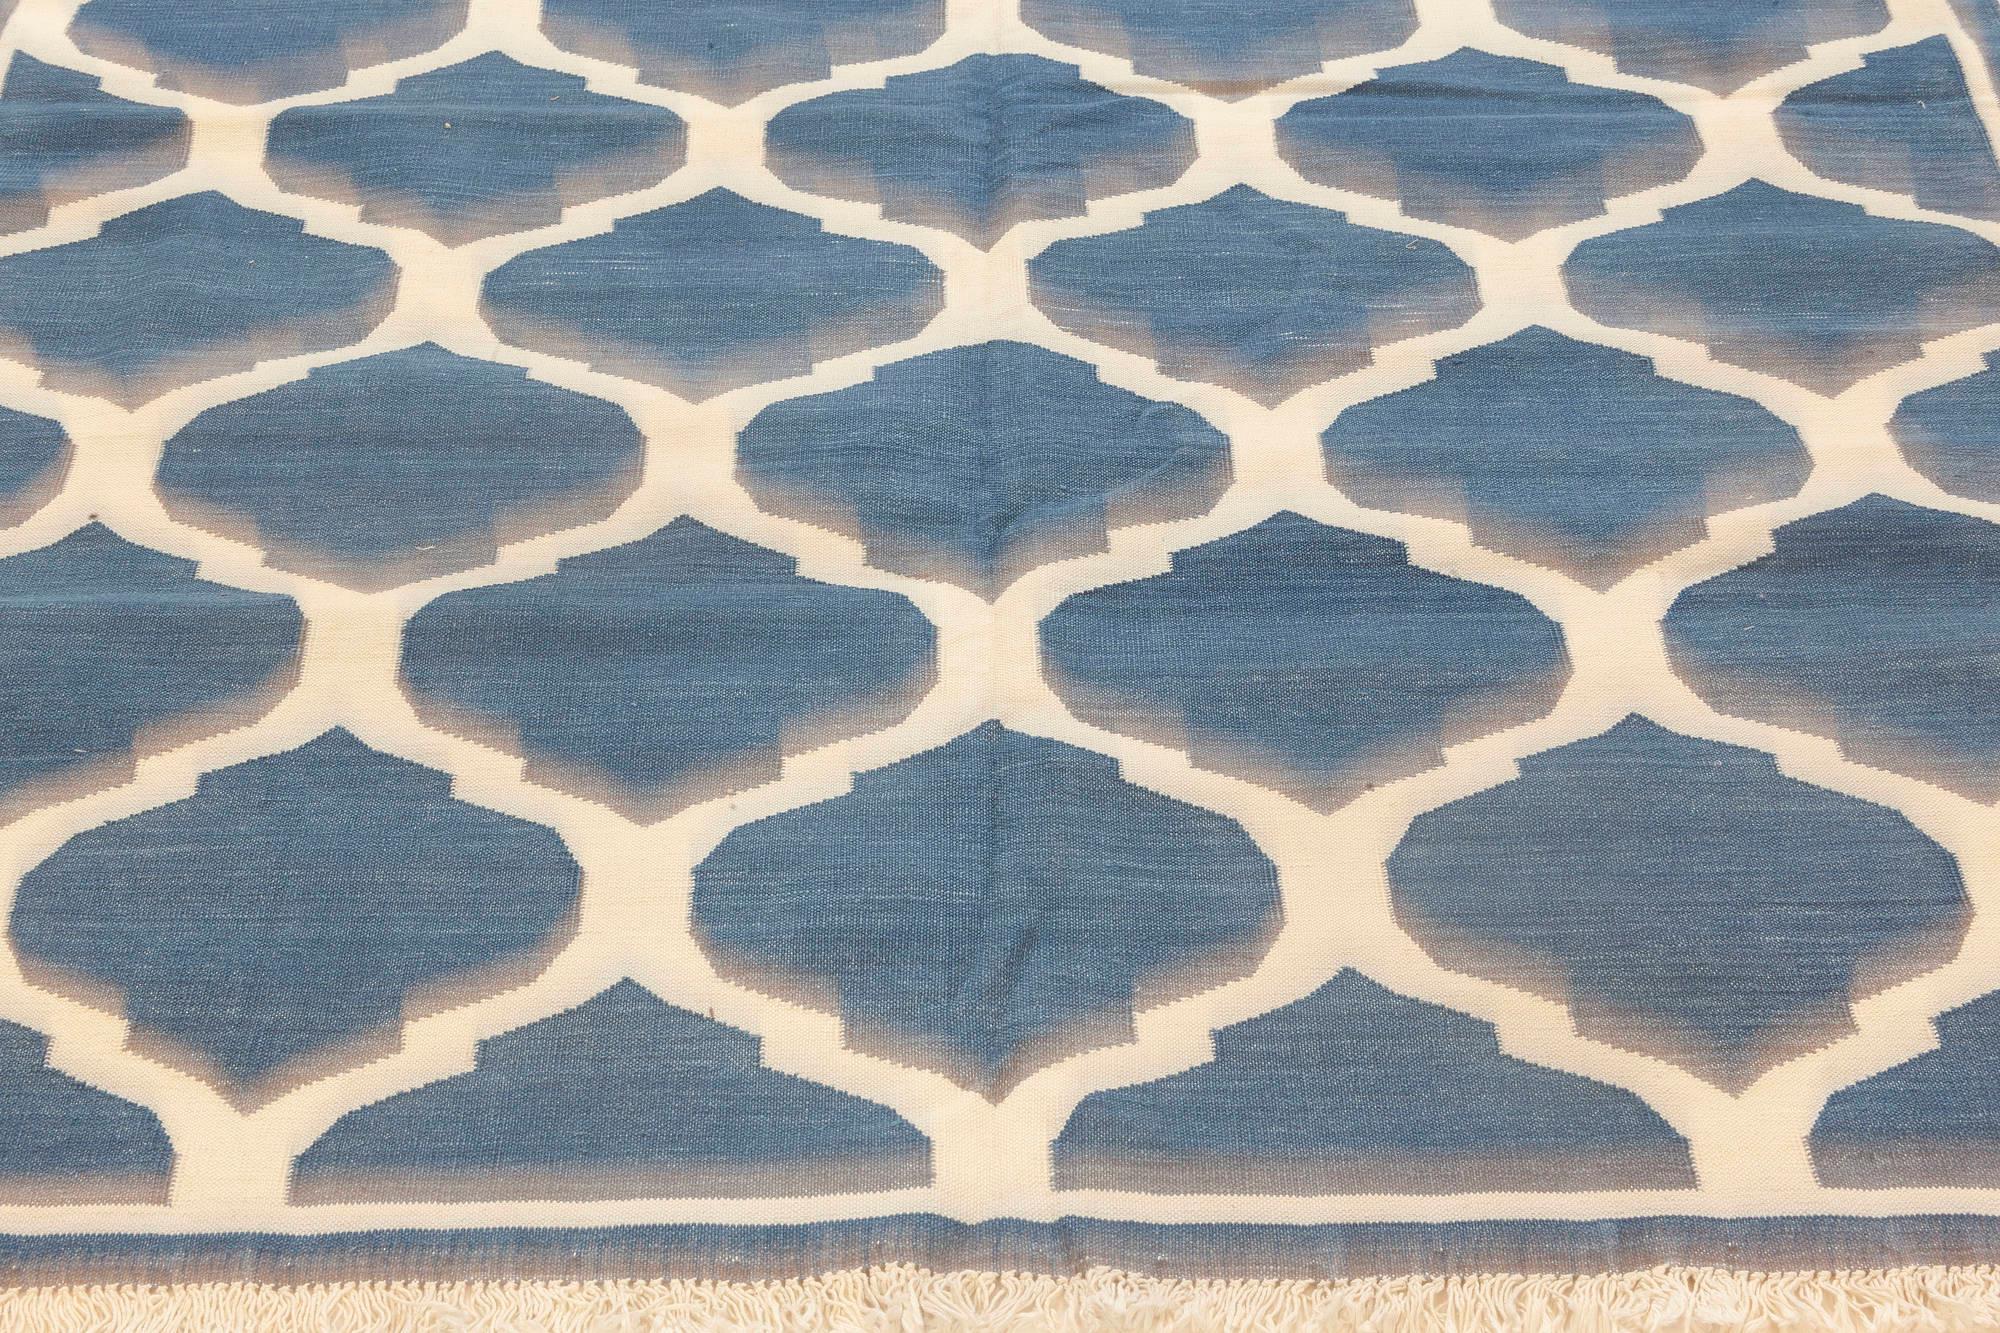 Hand-Woven Indian Dhurrie Design Blue and White Handmade Cotton Rug by Doris Leslie Blau For Sale